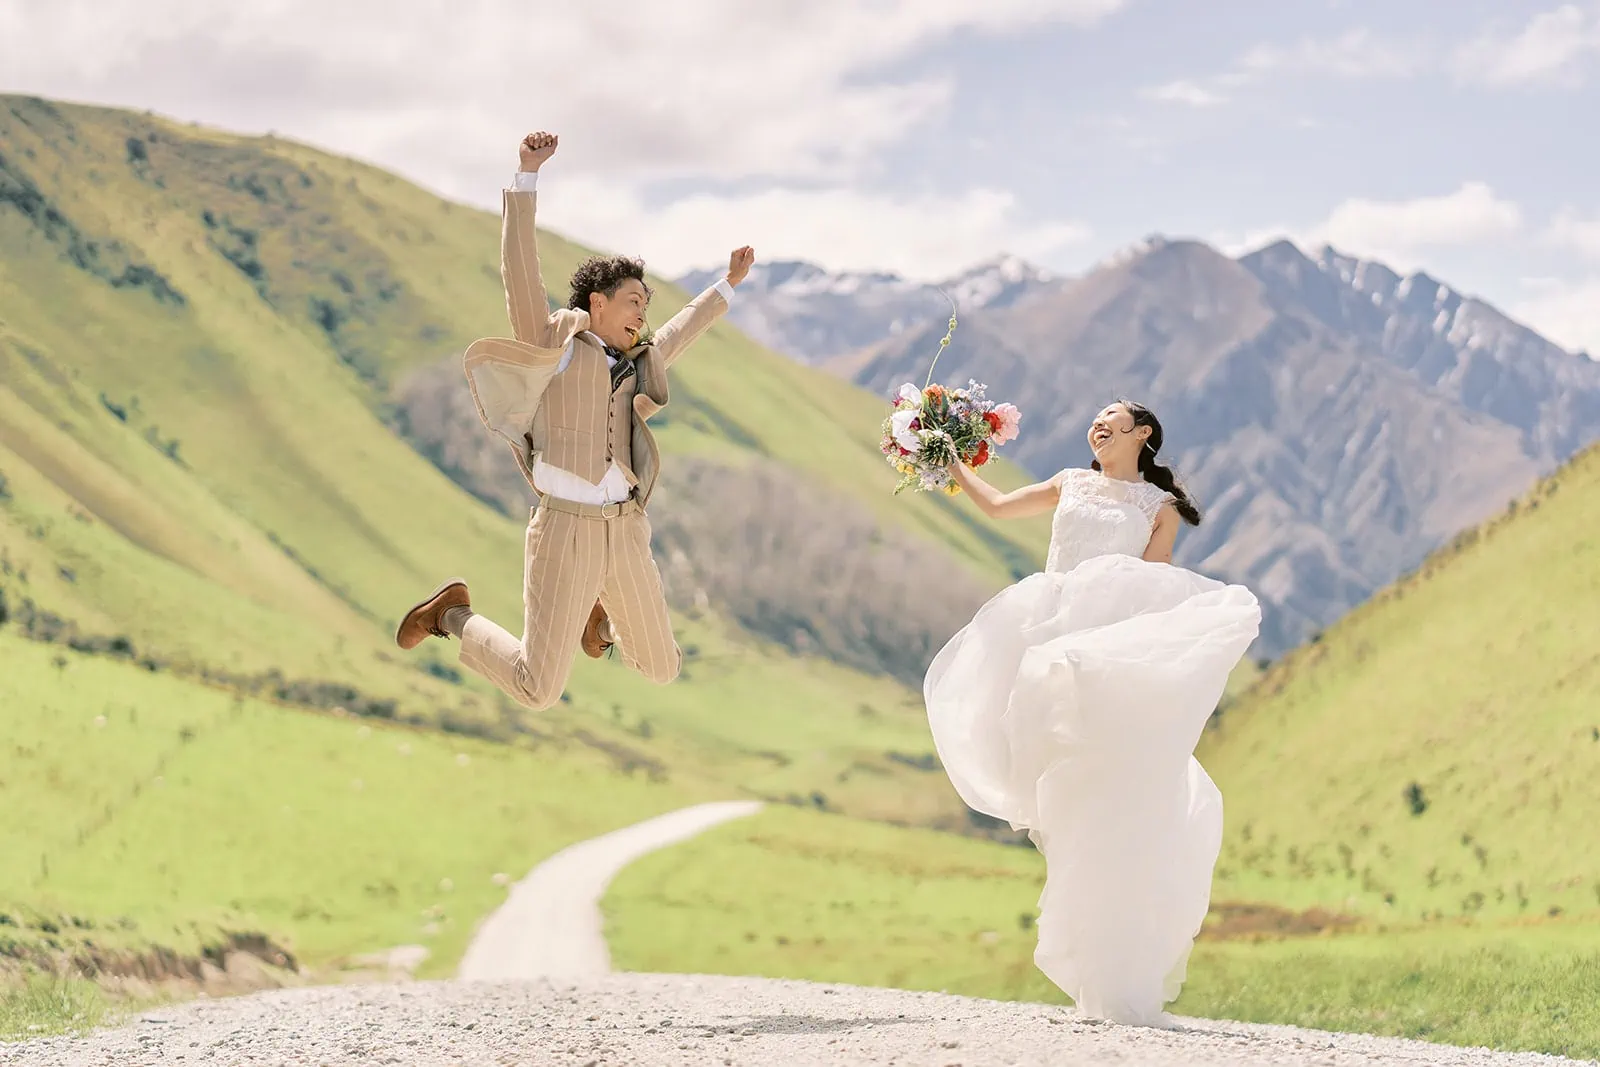 Queenstown Elopement Heli Wedding Photographer クイーンズタウン結婚式 | A Saki bride and Taisei groom jumping in the air on a road in Queenstown's majestic mountains.